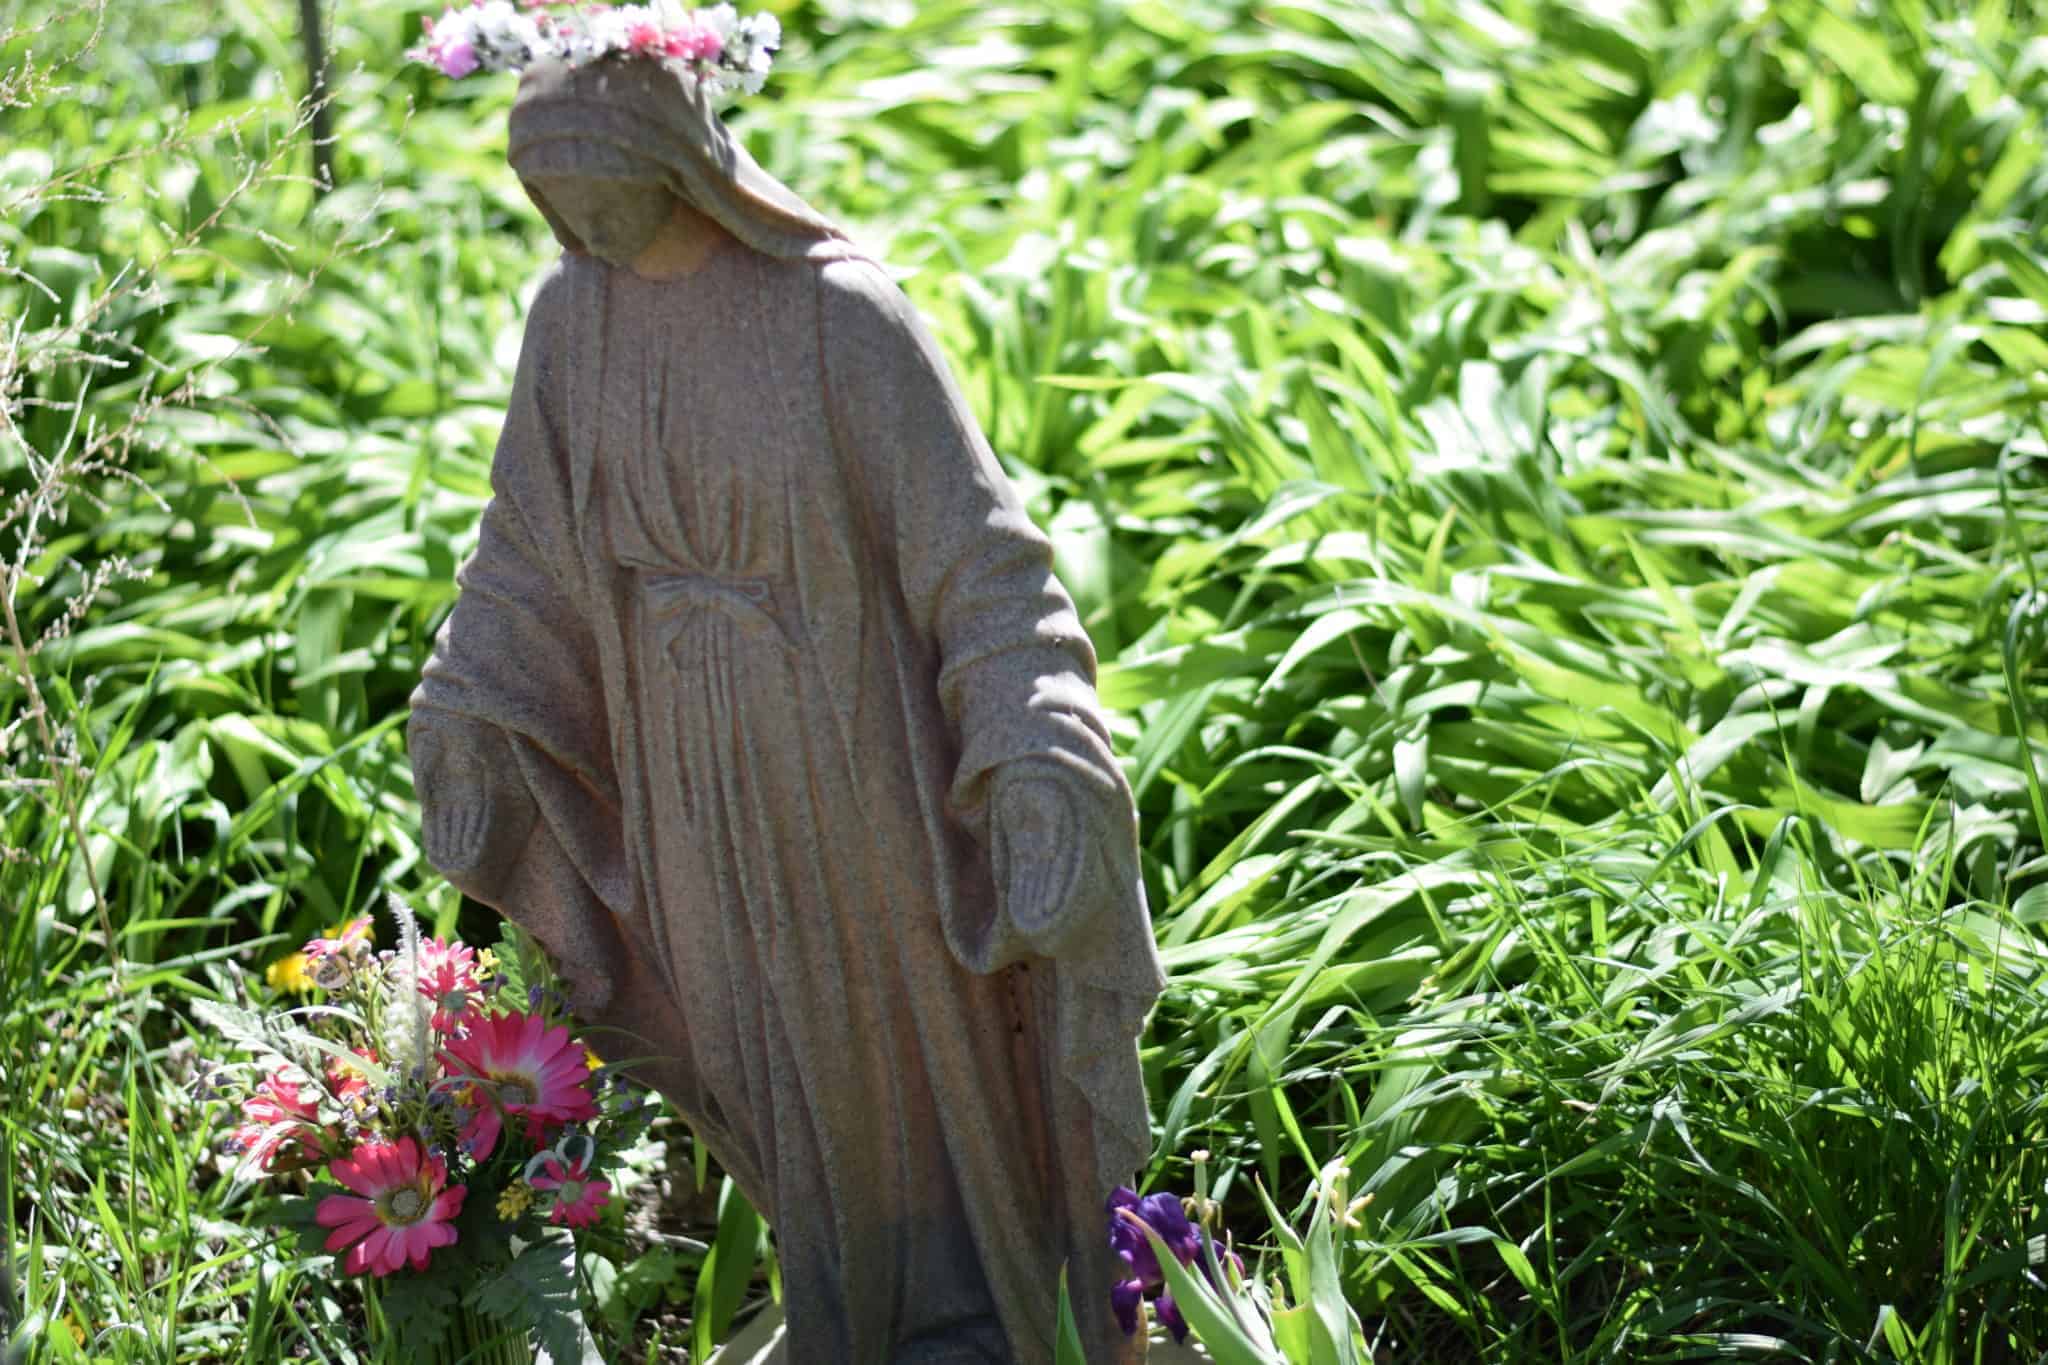 Mary garden shrine for the month of May is decorated with flowers and she is wearing a floral crown